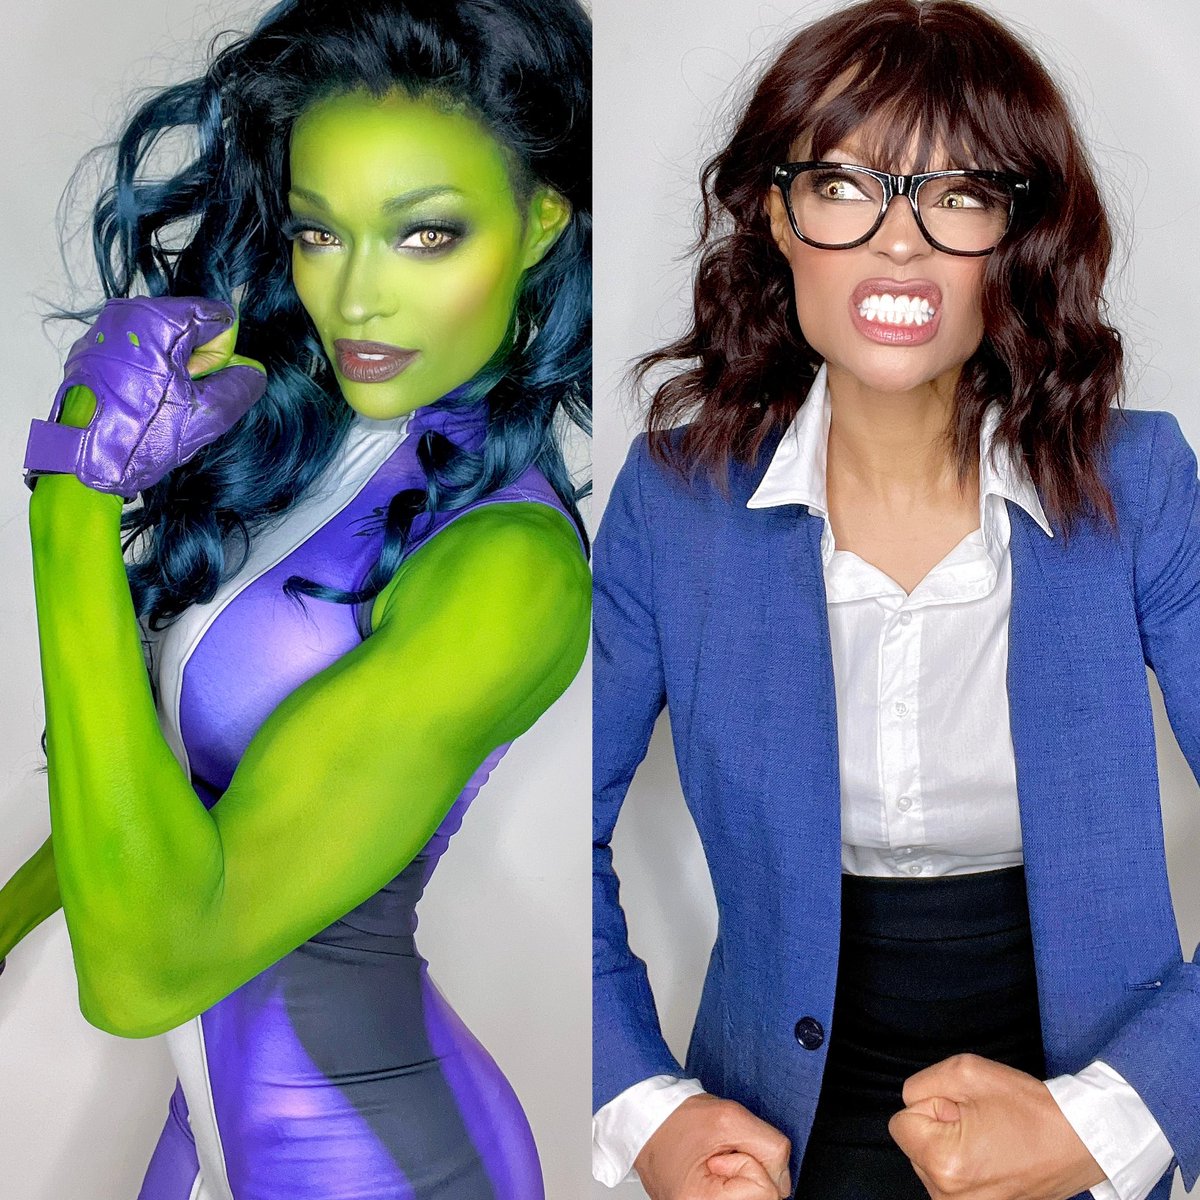 THE NUMBER OF DUDES ASKING me if “I’ve rEaD tHe CoMicS” is appalling and dumb asf in 2022. 😐
Bruh, I was doing LIVE DEBATES AT SDCC as She-Hulk when you were still in 4th grade and wiping boogies on your Star Wars lunch box at the bus stop so cram it. #SheHulk